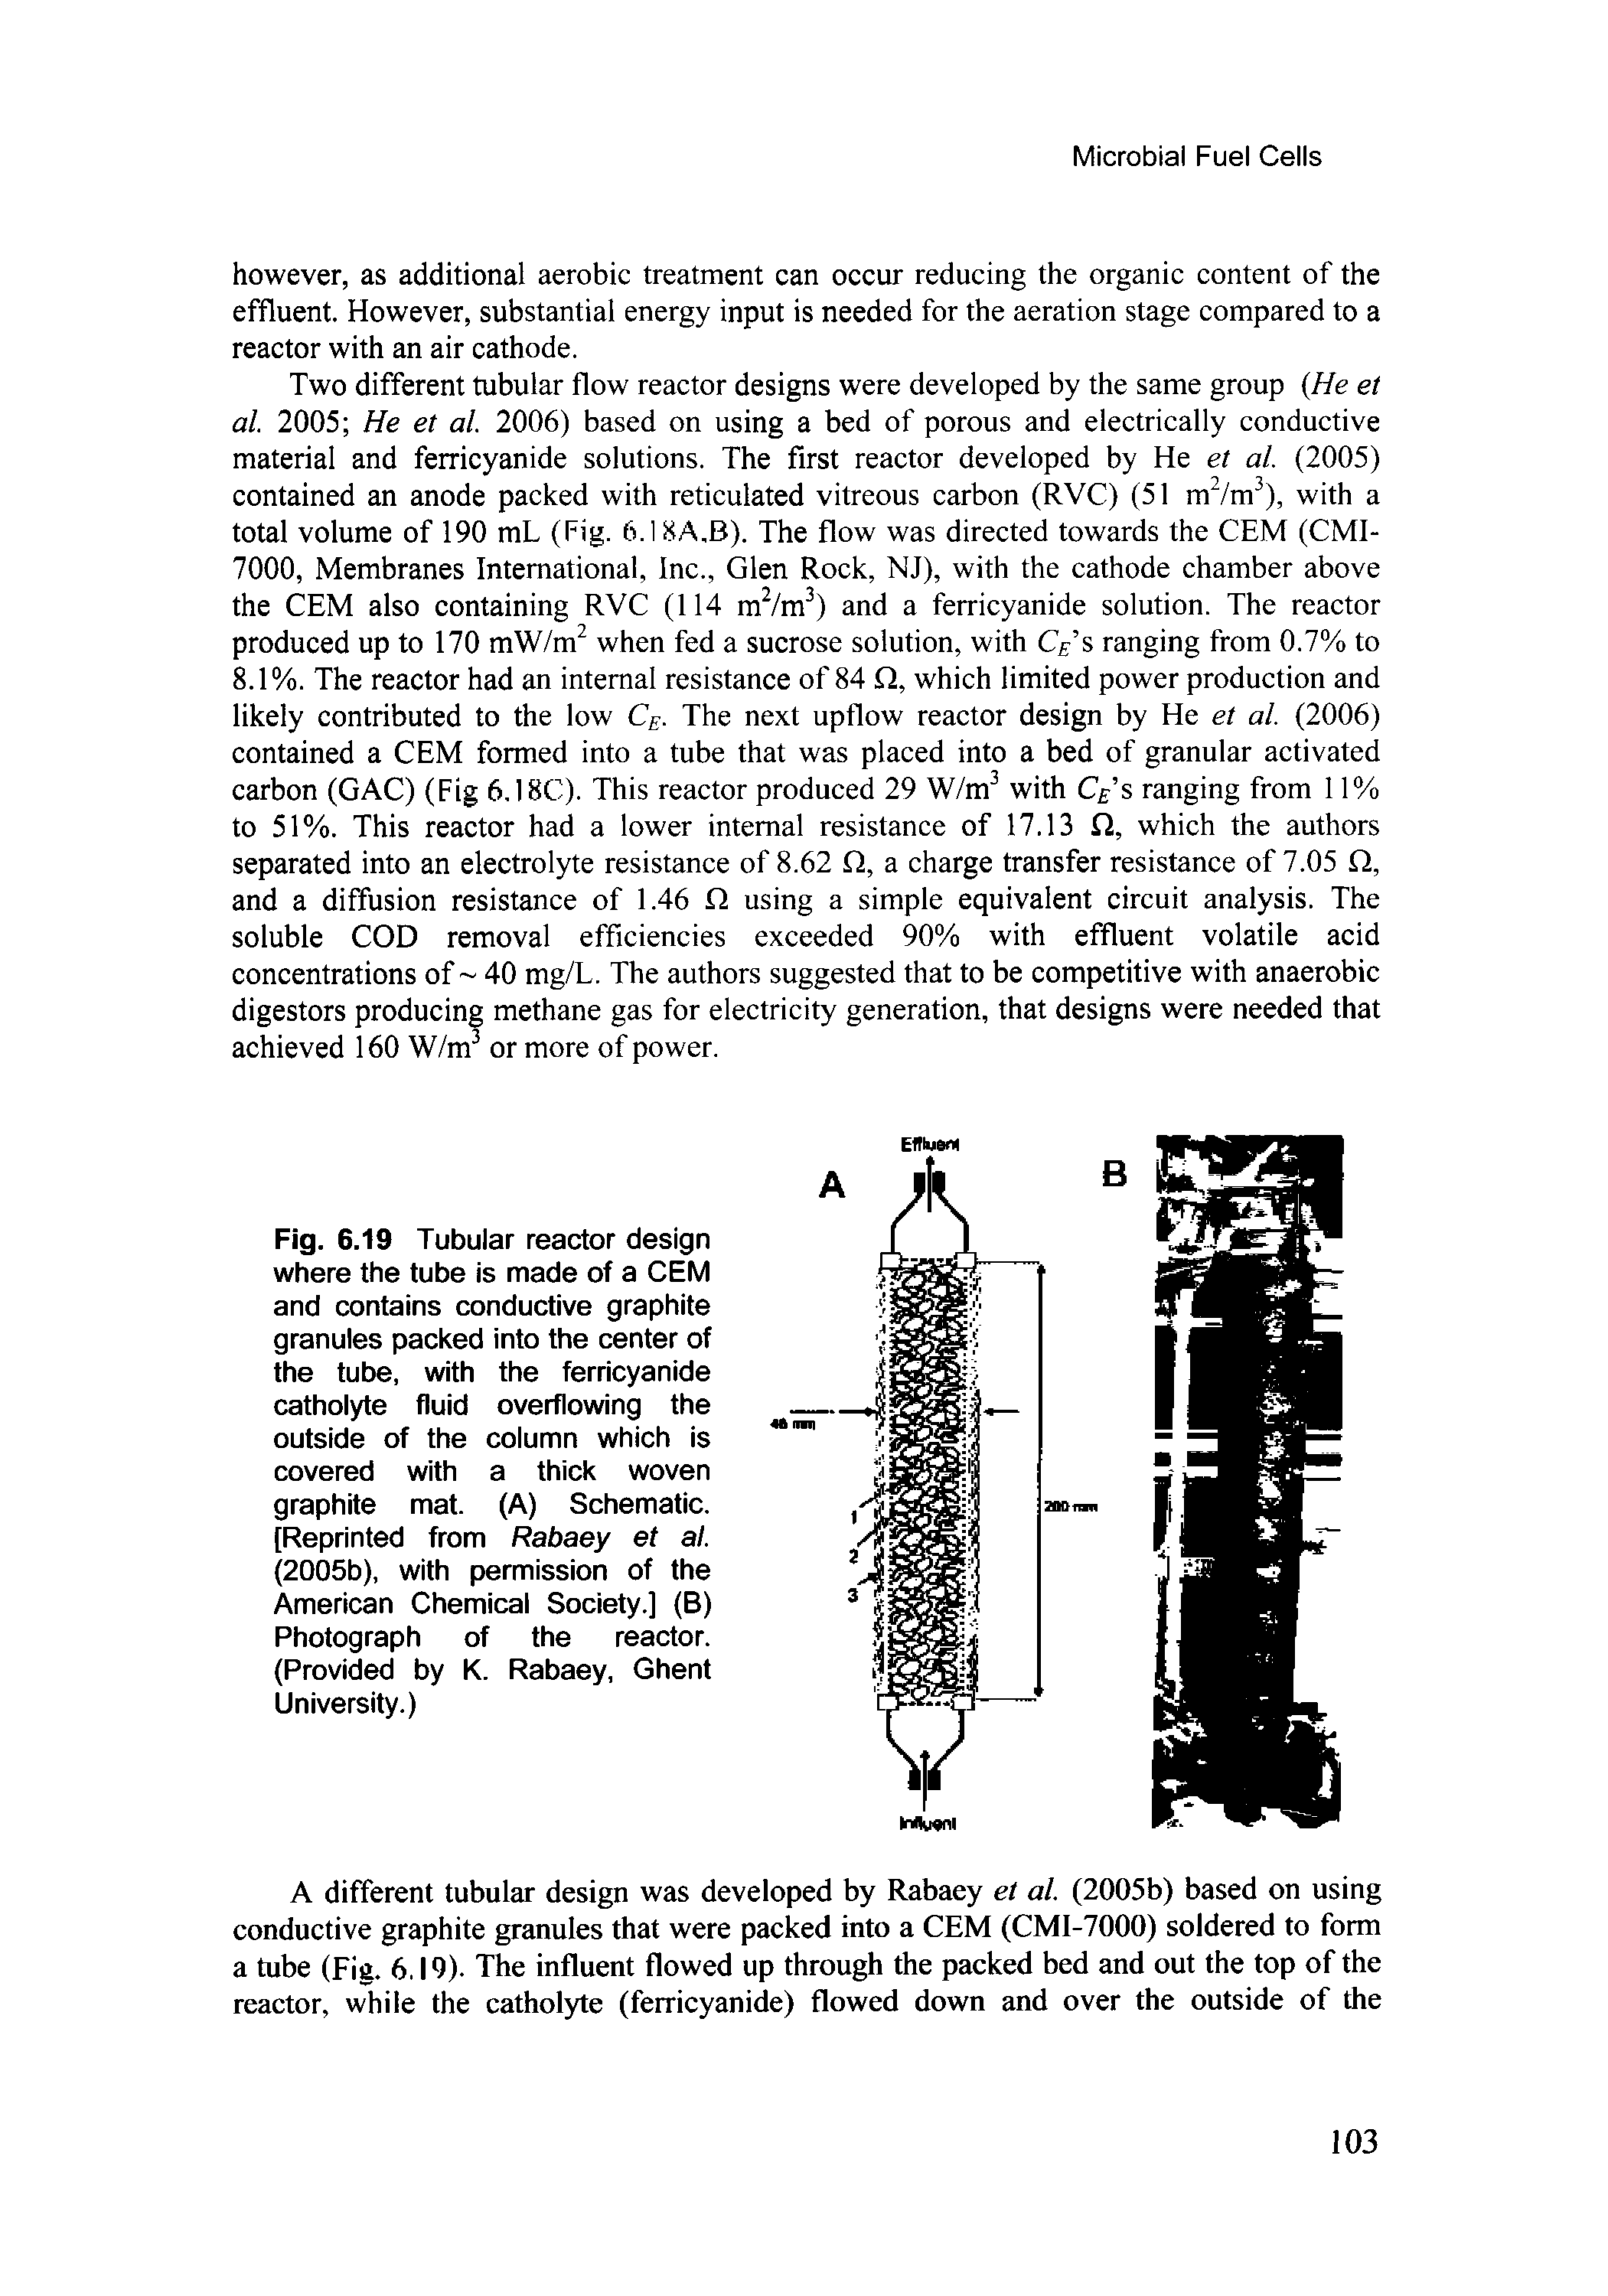 Fig. 6.19 Tubular reactor design where the tube is made of a CEM and contains conductive graphite granules packed into the center of the tube, with the ferricyanide cathoiyte fluid overflowing the outside of the column which is covered with a thick woven graphite mat. (A) Schematic. [Reprinted from Rabaey et al. (2005b), with permission of the American Chemicai Society.] (B) Photograph of the reactor. (Provided by K. Rabaey, Ghent University.)...